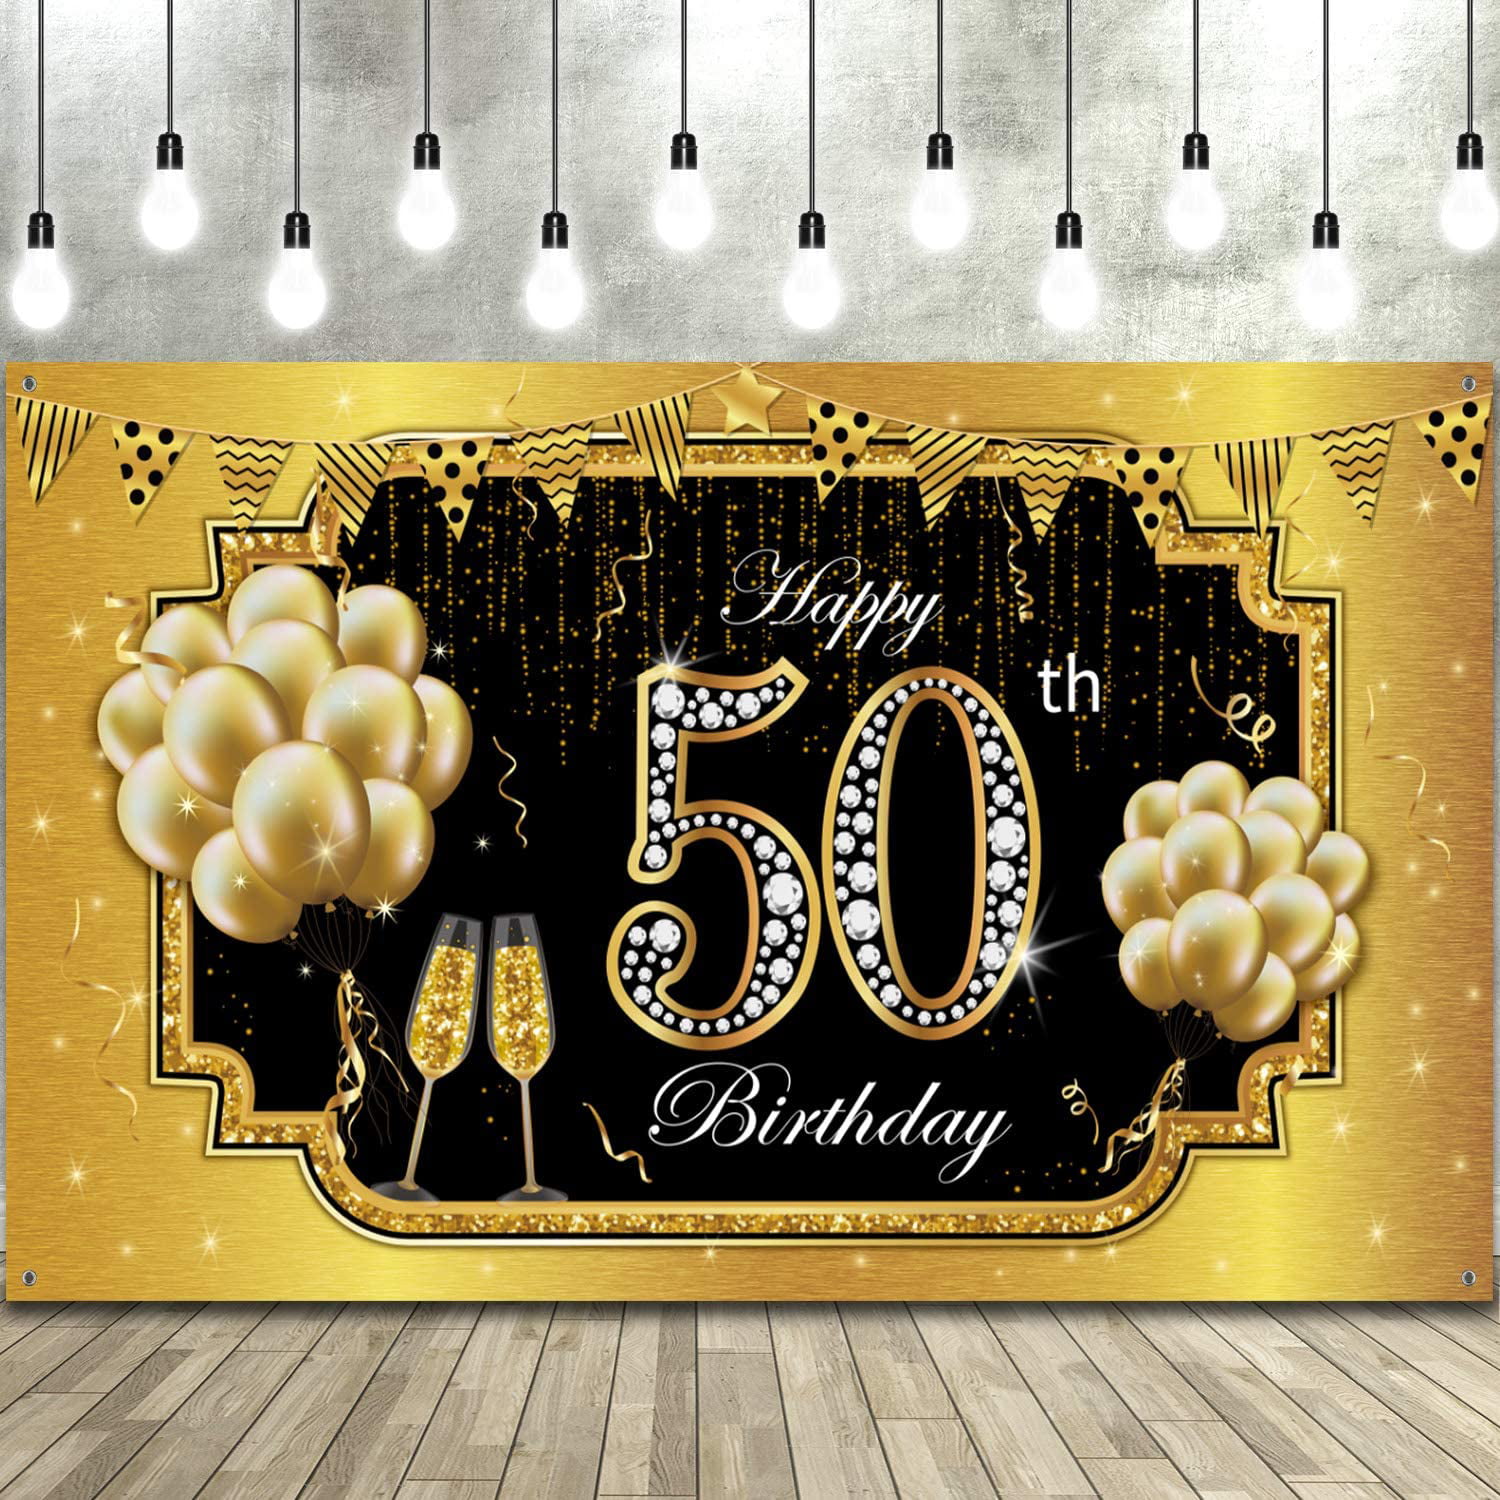 Large Happy 50th Birthday Decoration Banner 50th Birthday Party Decorations Supplies Black and Gold Happy 50th Birthday Banner Sign 9.8x1.6ft 